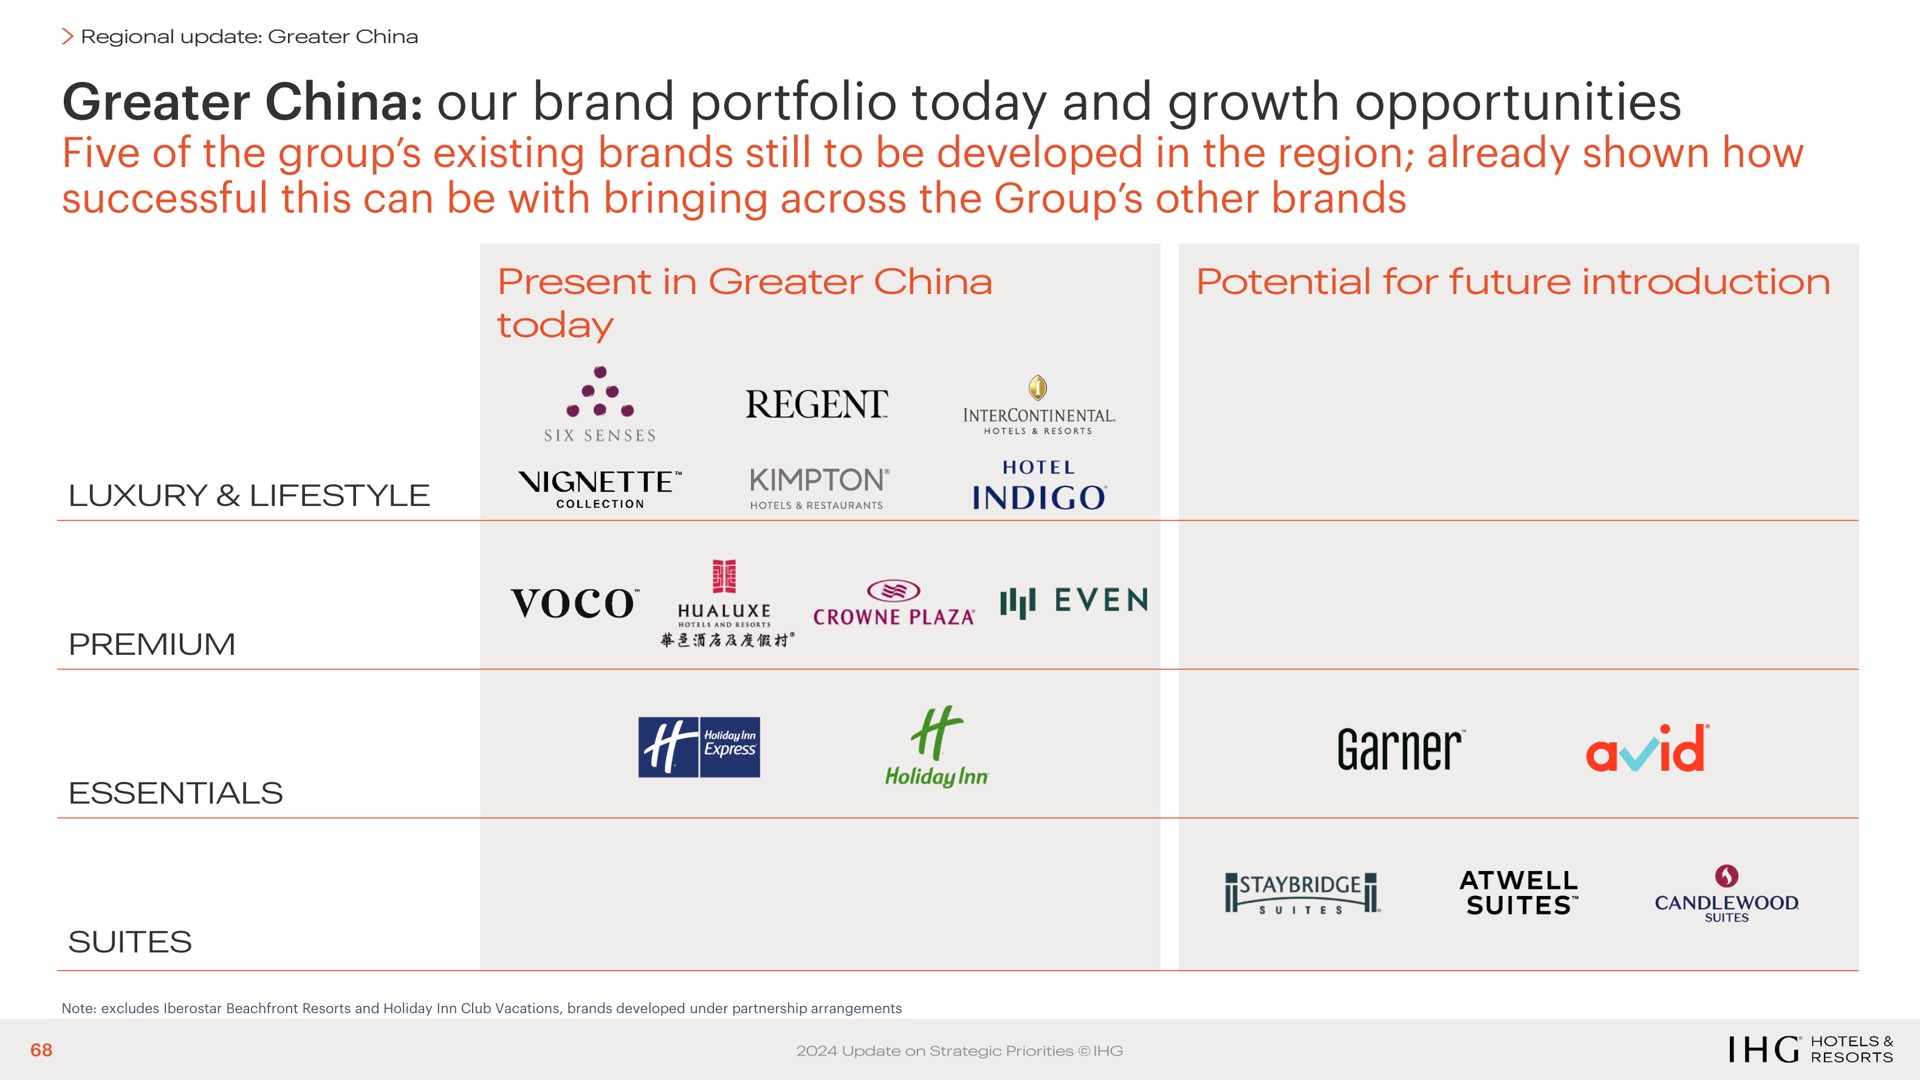 greater china our brand portfolio today and growth opportunities five of the group existing brands still to be developed in the region already shown how successful this can be with bringing across the group other brands a | IHG Hotels